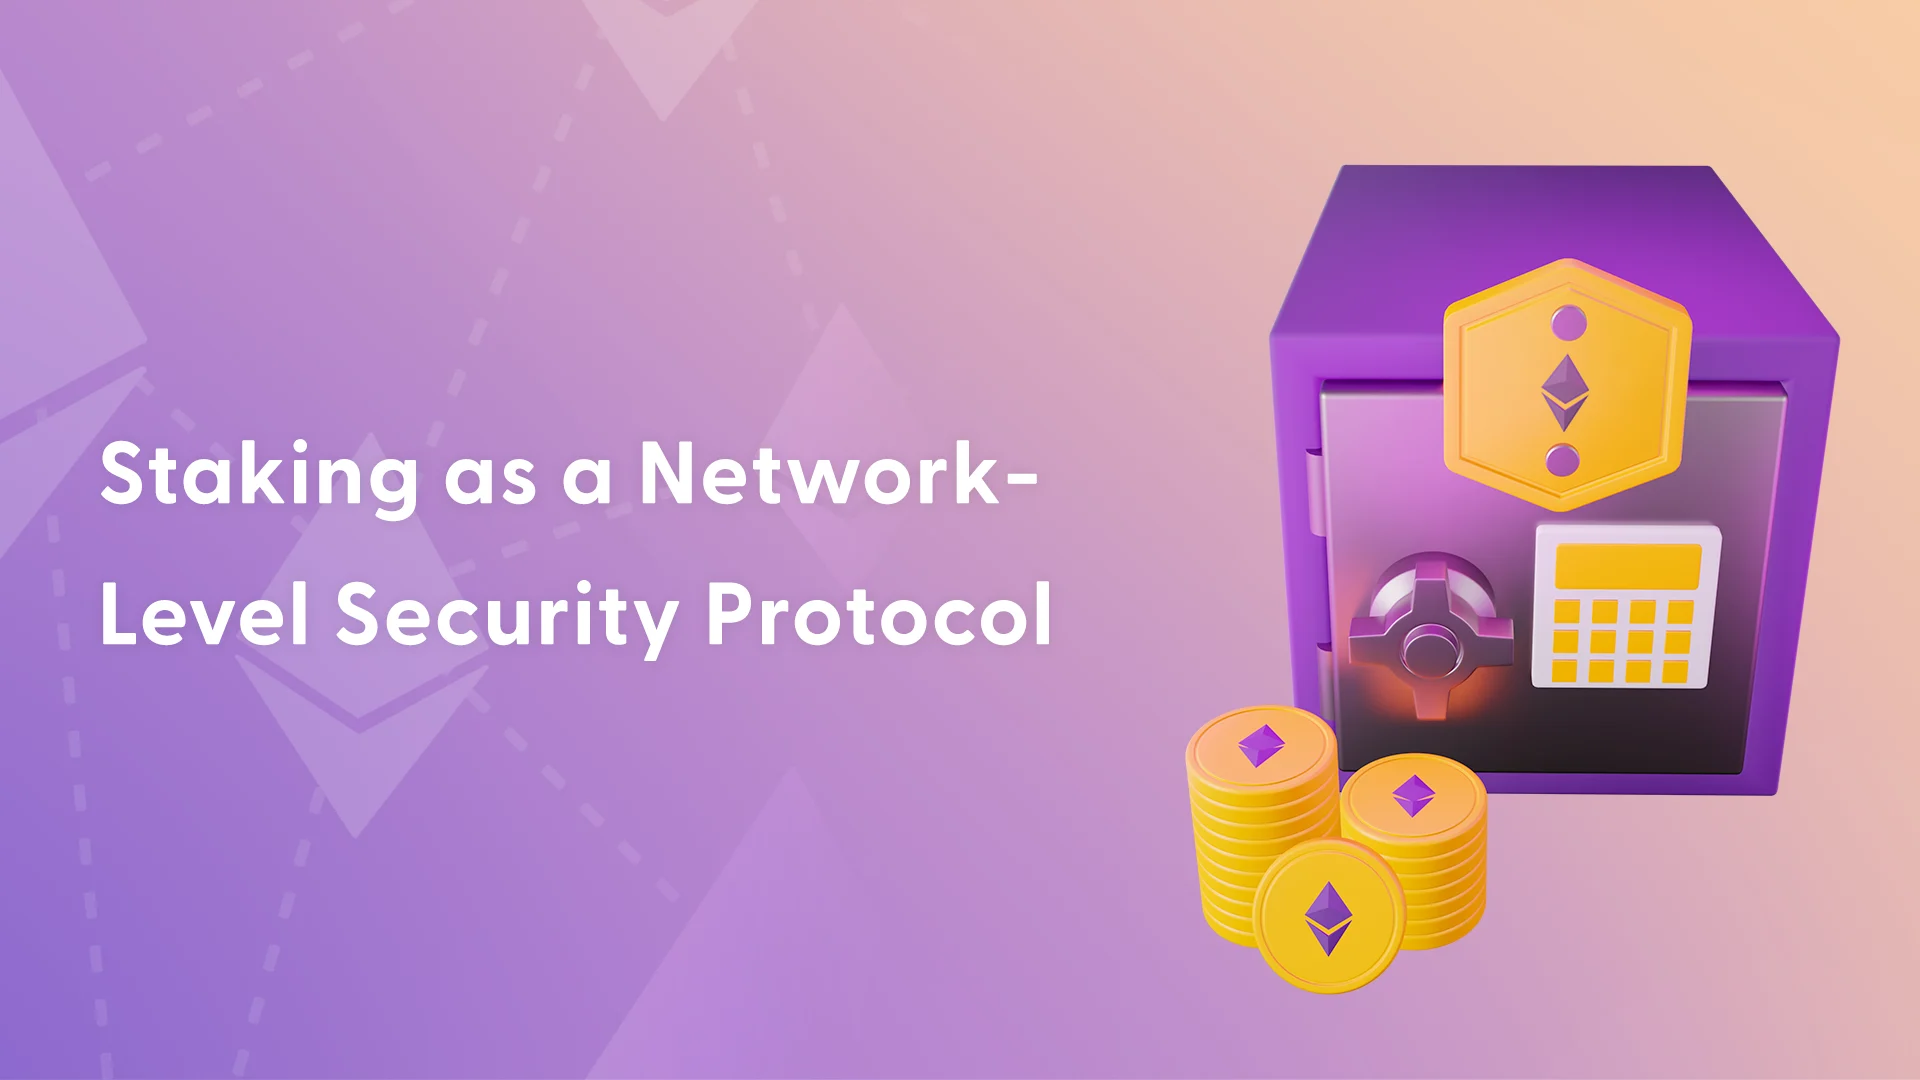 Staking as a Network-Level Security Protocol